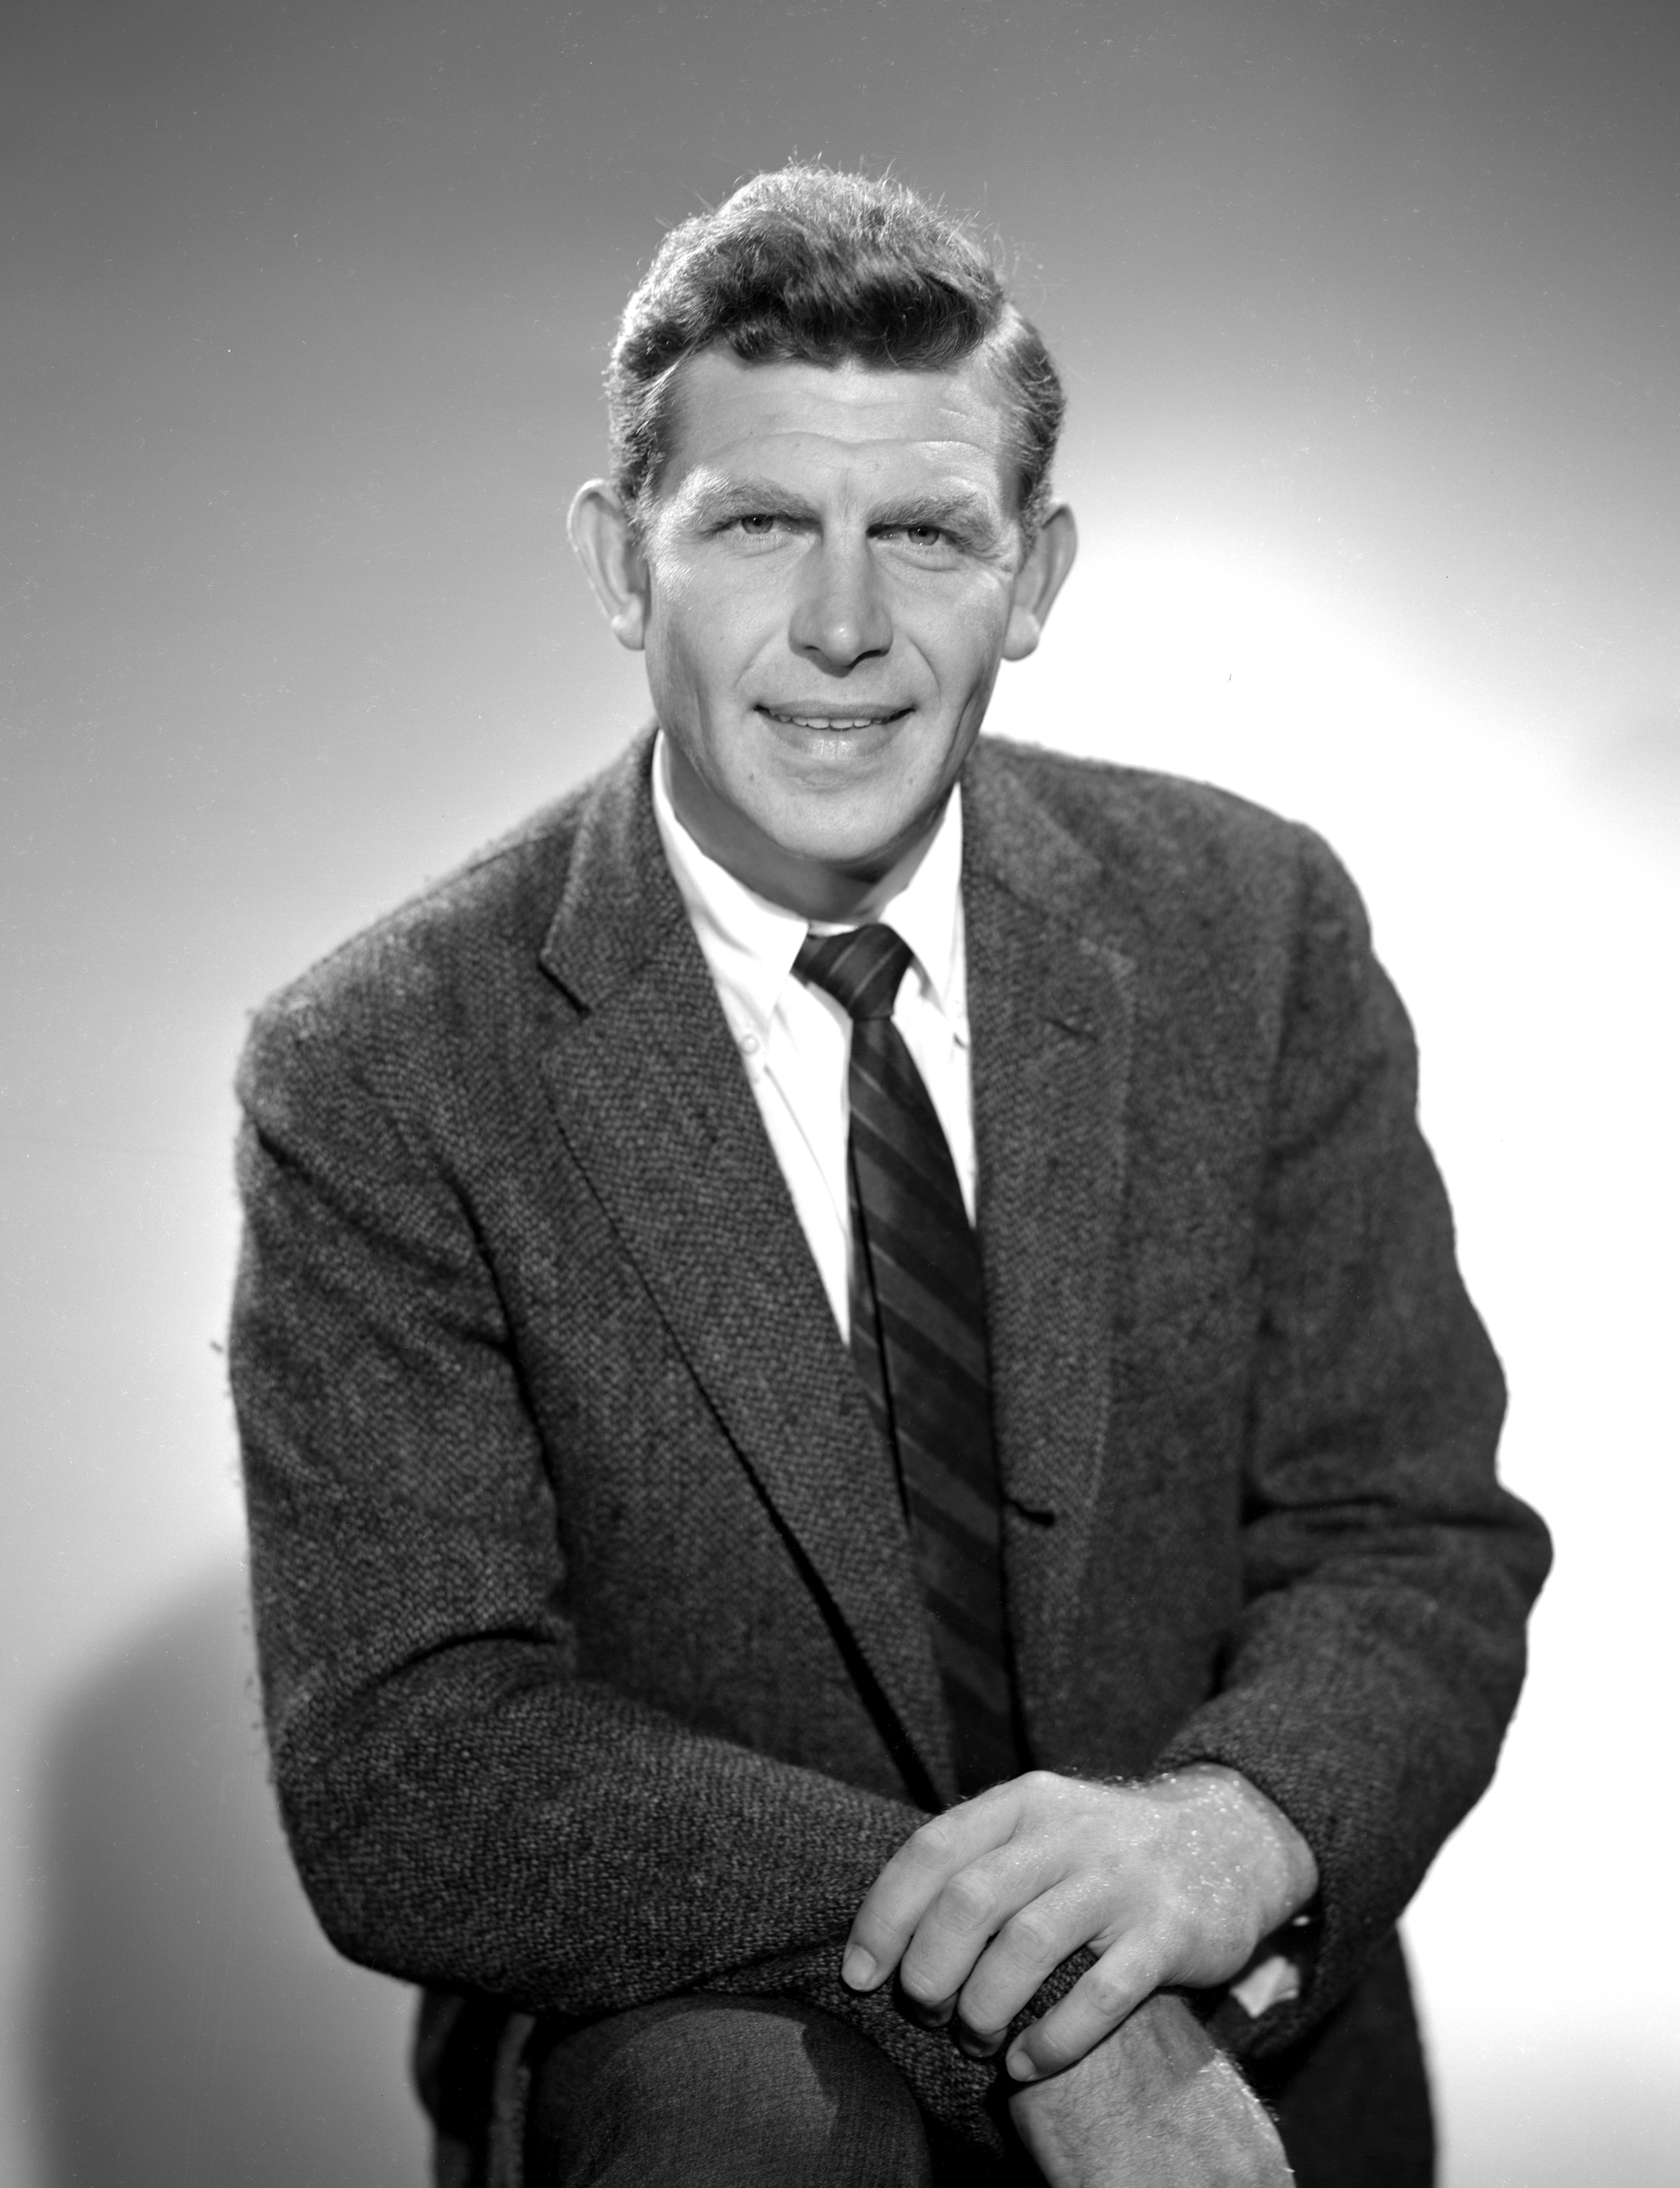 Andy Griffith as Andy Taylor in the CBS show "The Andy Griffith Show," August 27, 1960. | Source: Getty Images